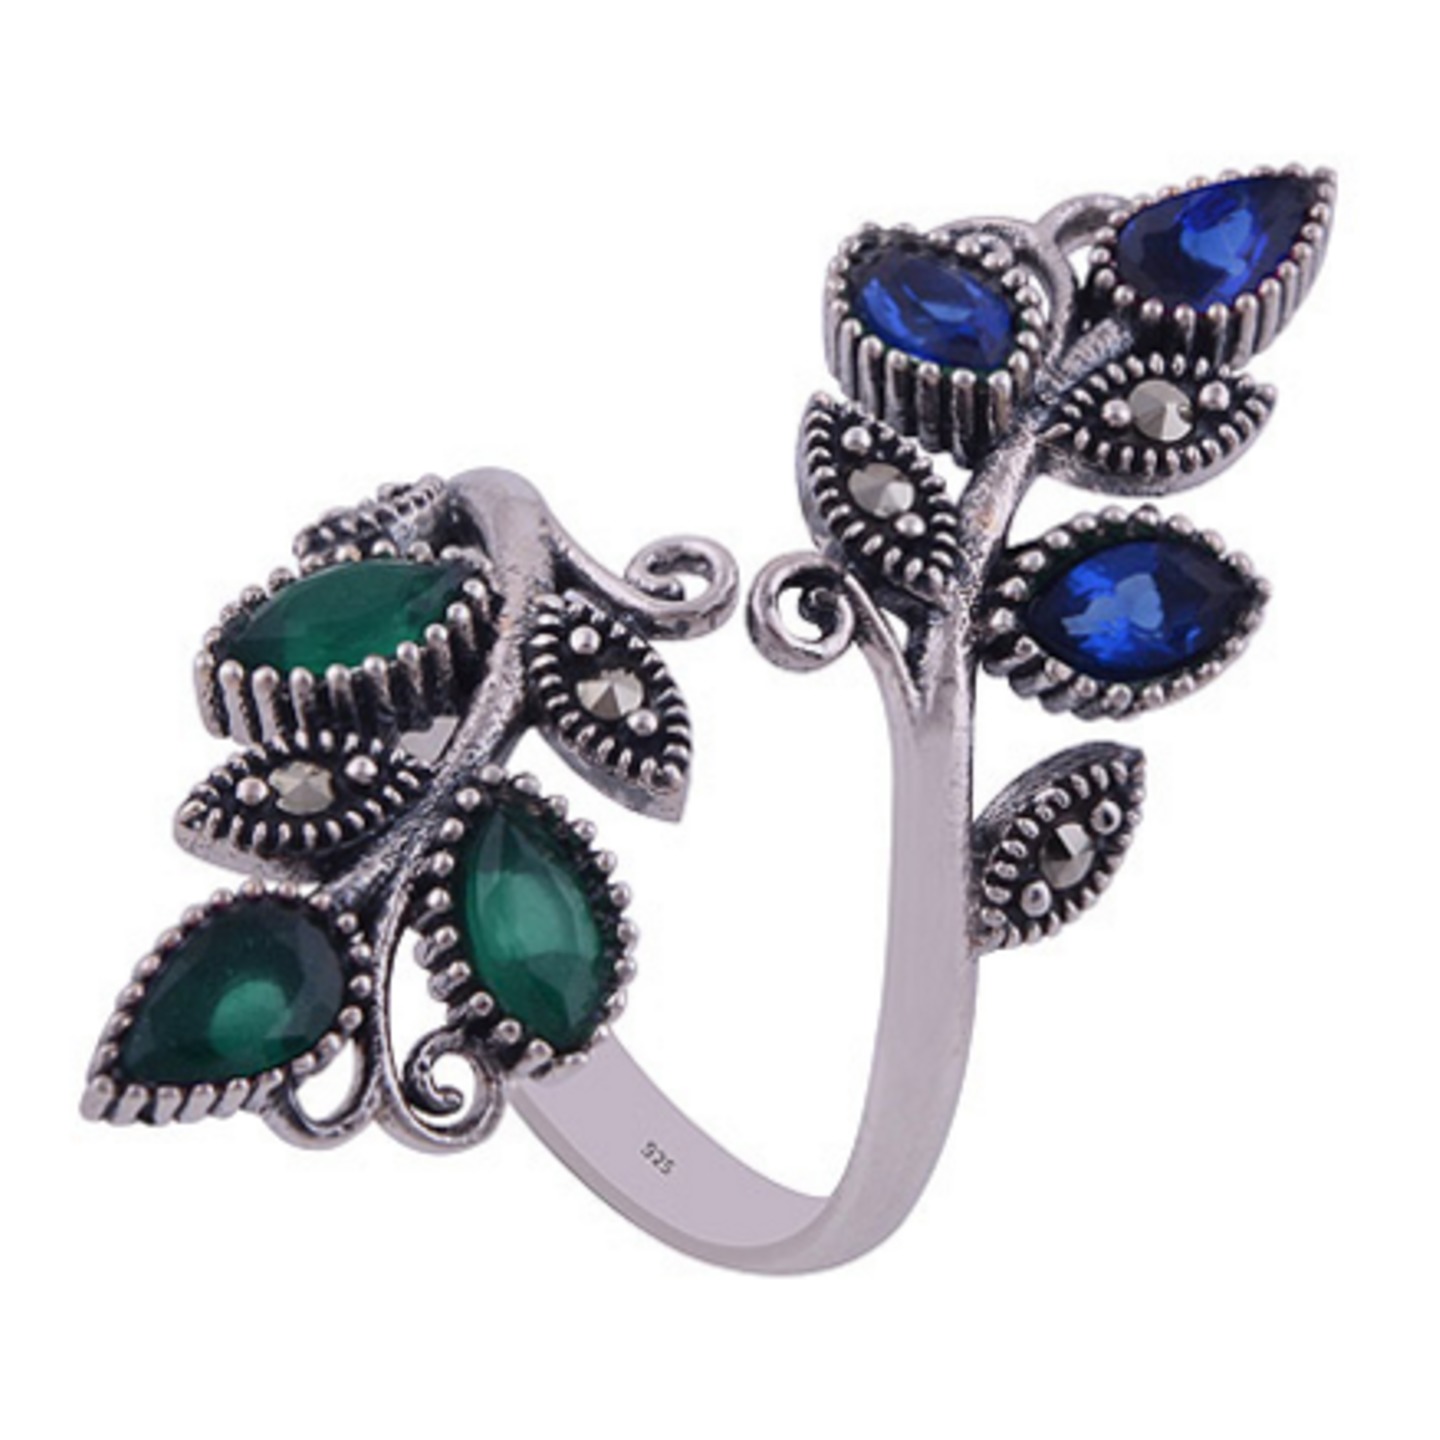 The Blue Green Vine Silver Ring